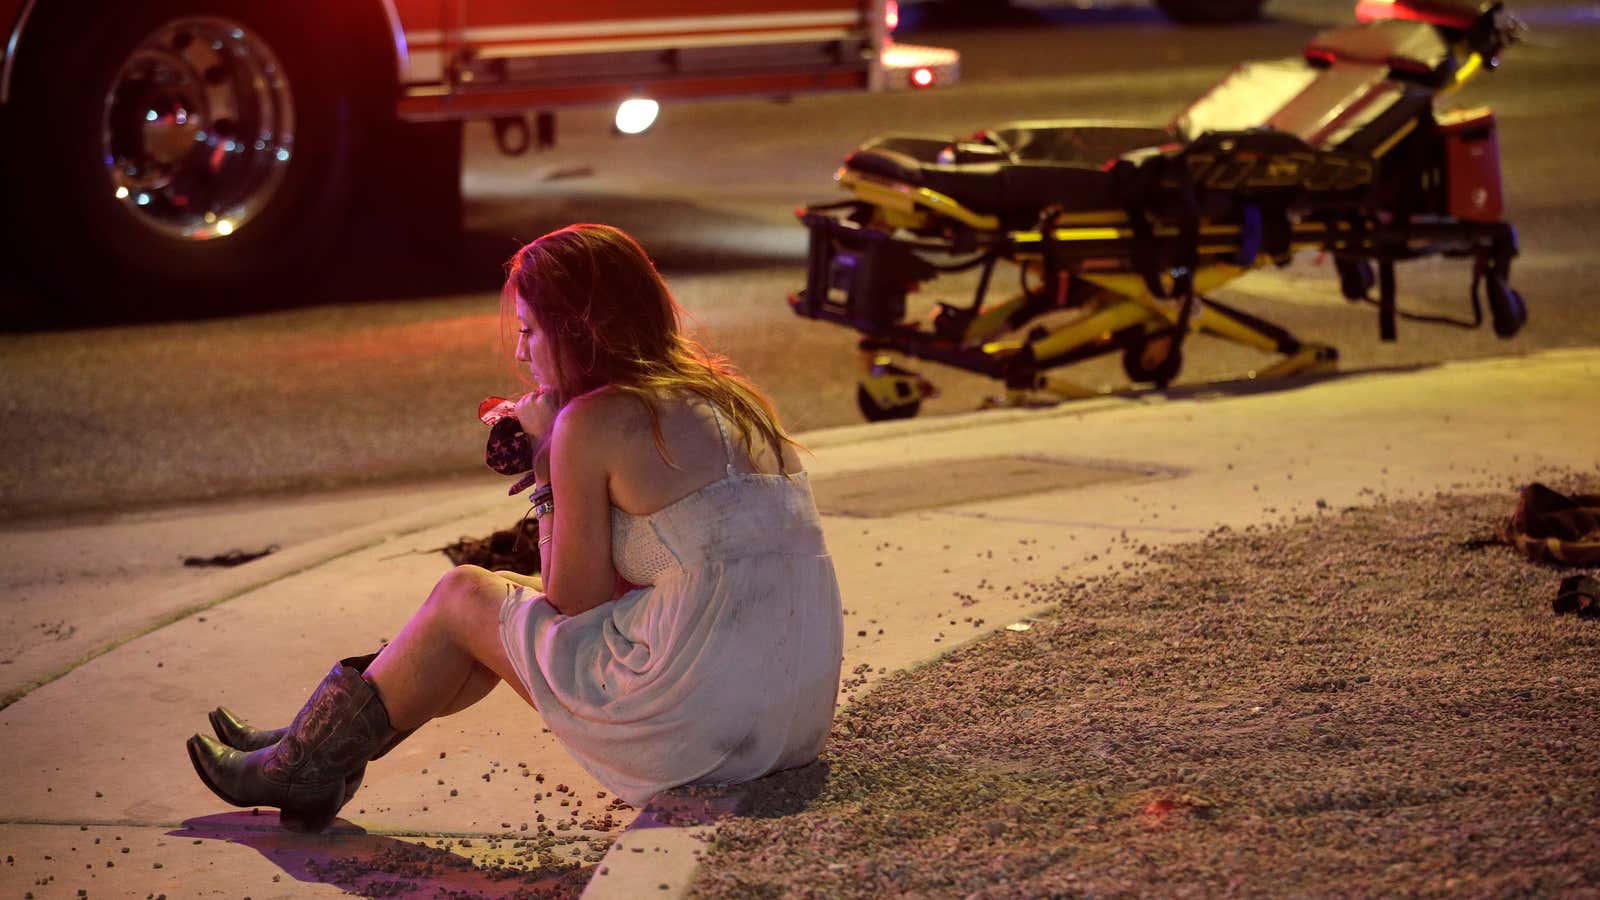 In the Las Vegas concert shooting, survivors were also the first responders